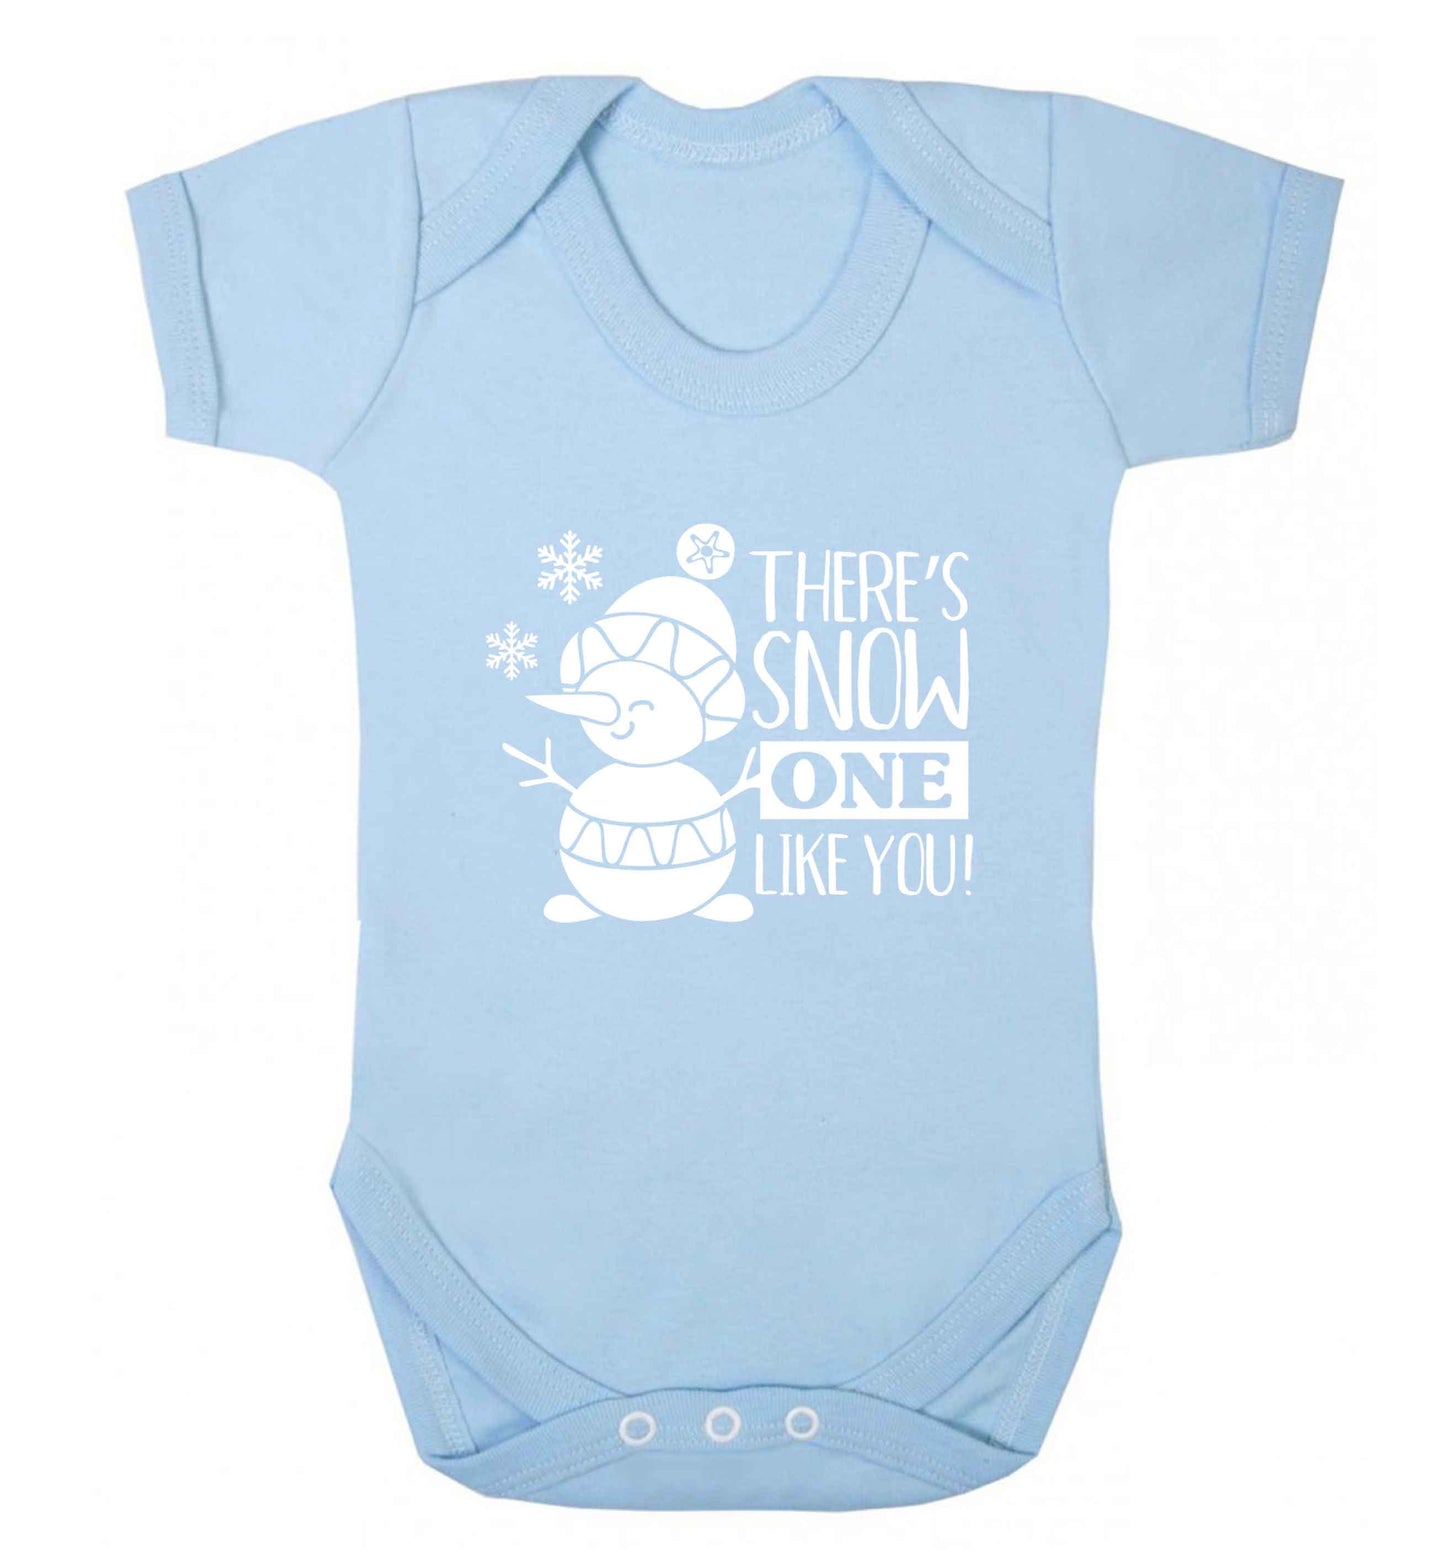 There's snow one like you baby vest pale blue 18-24 months